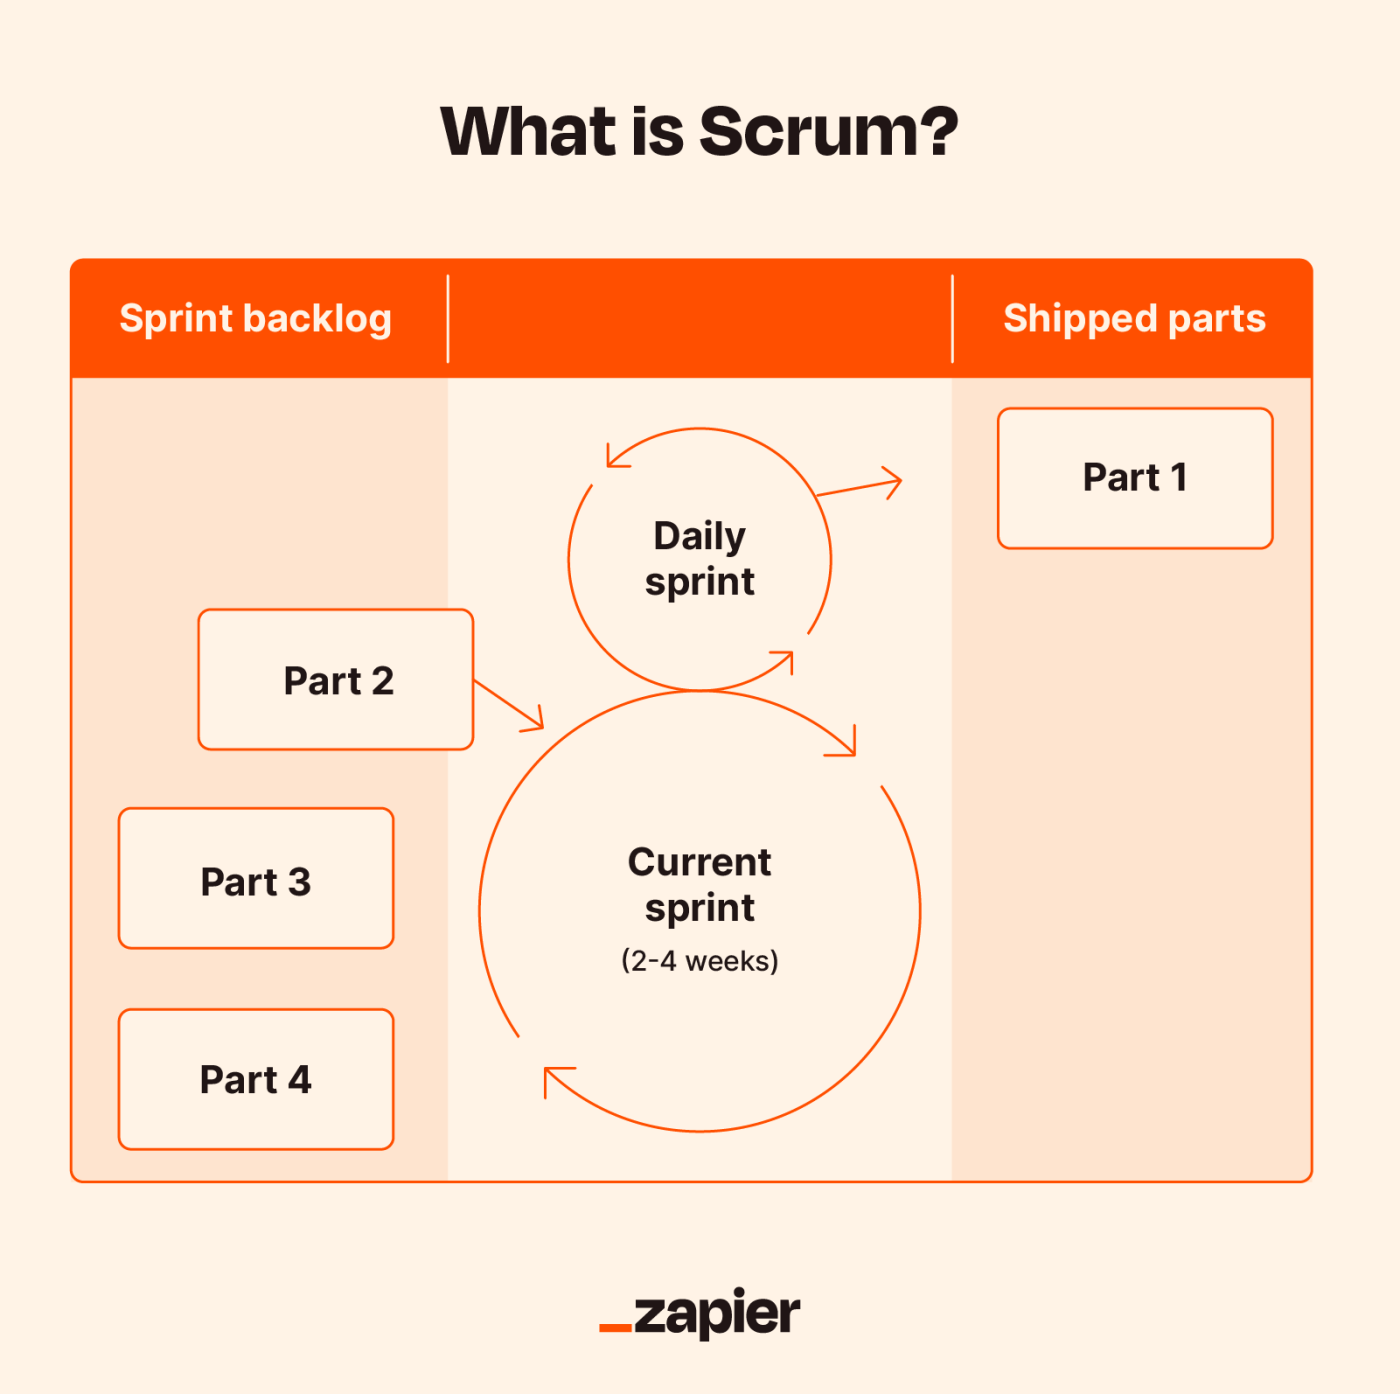 Example of tasks ordered using Scrum prioritization.